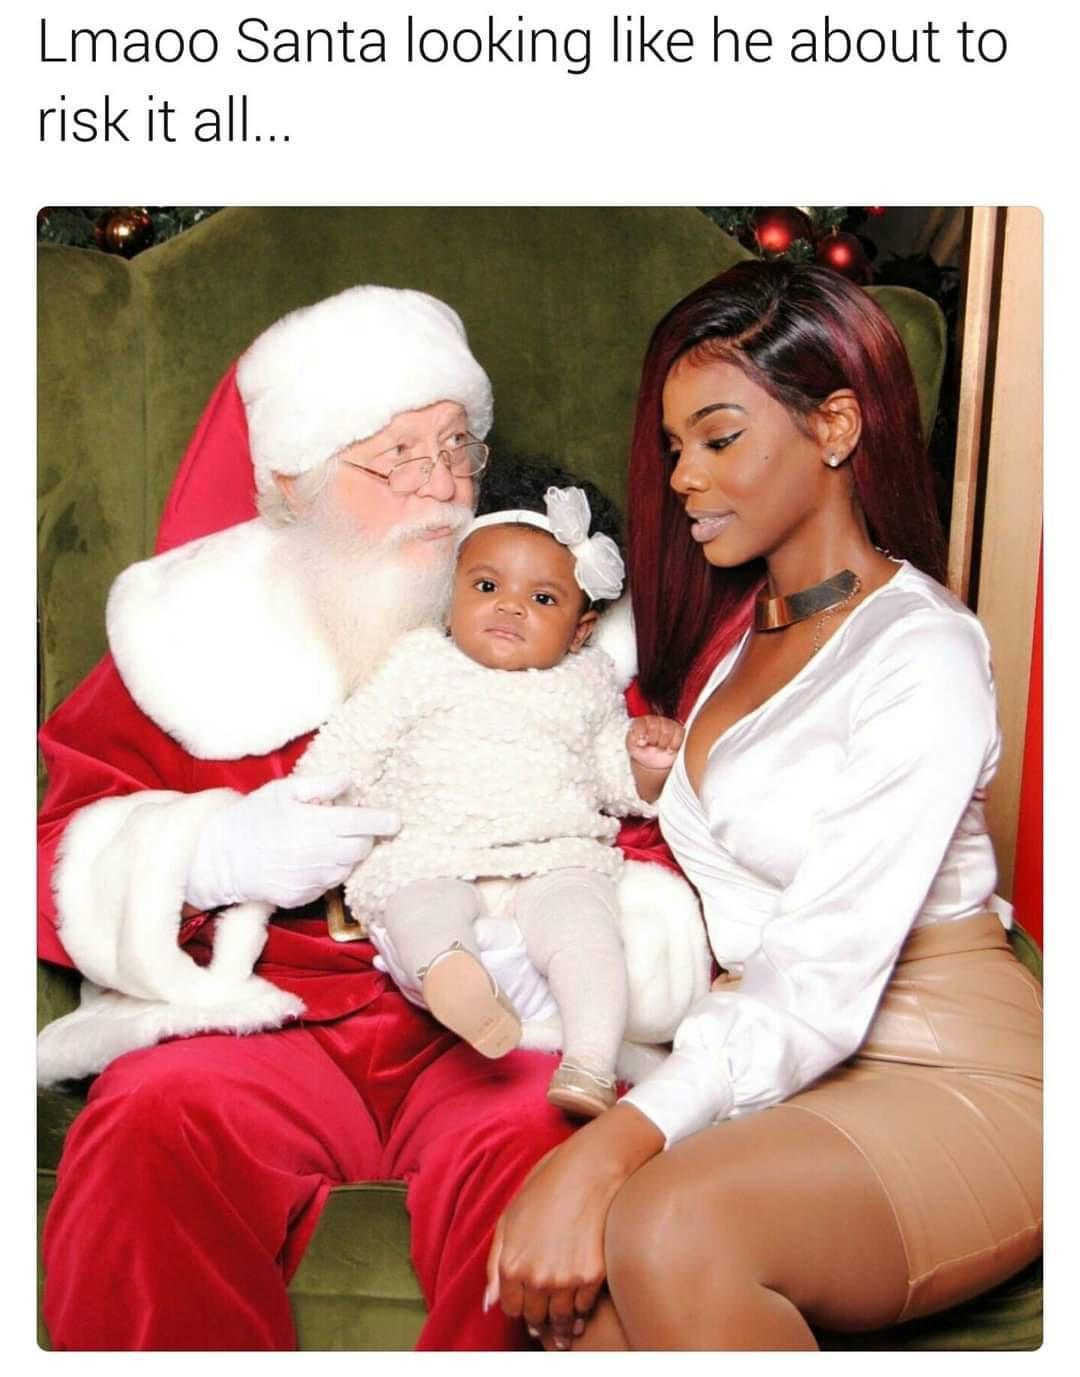 santa about to risk it all - Lmaoo Santa looking he about to risk it all...